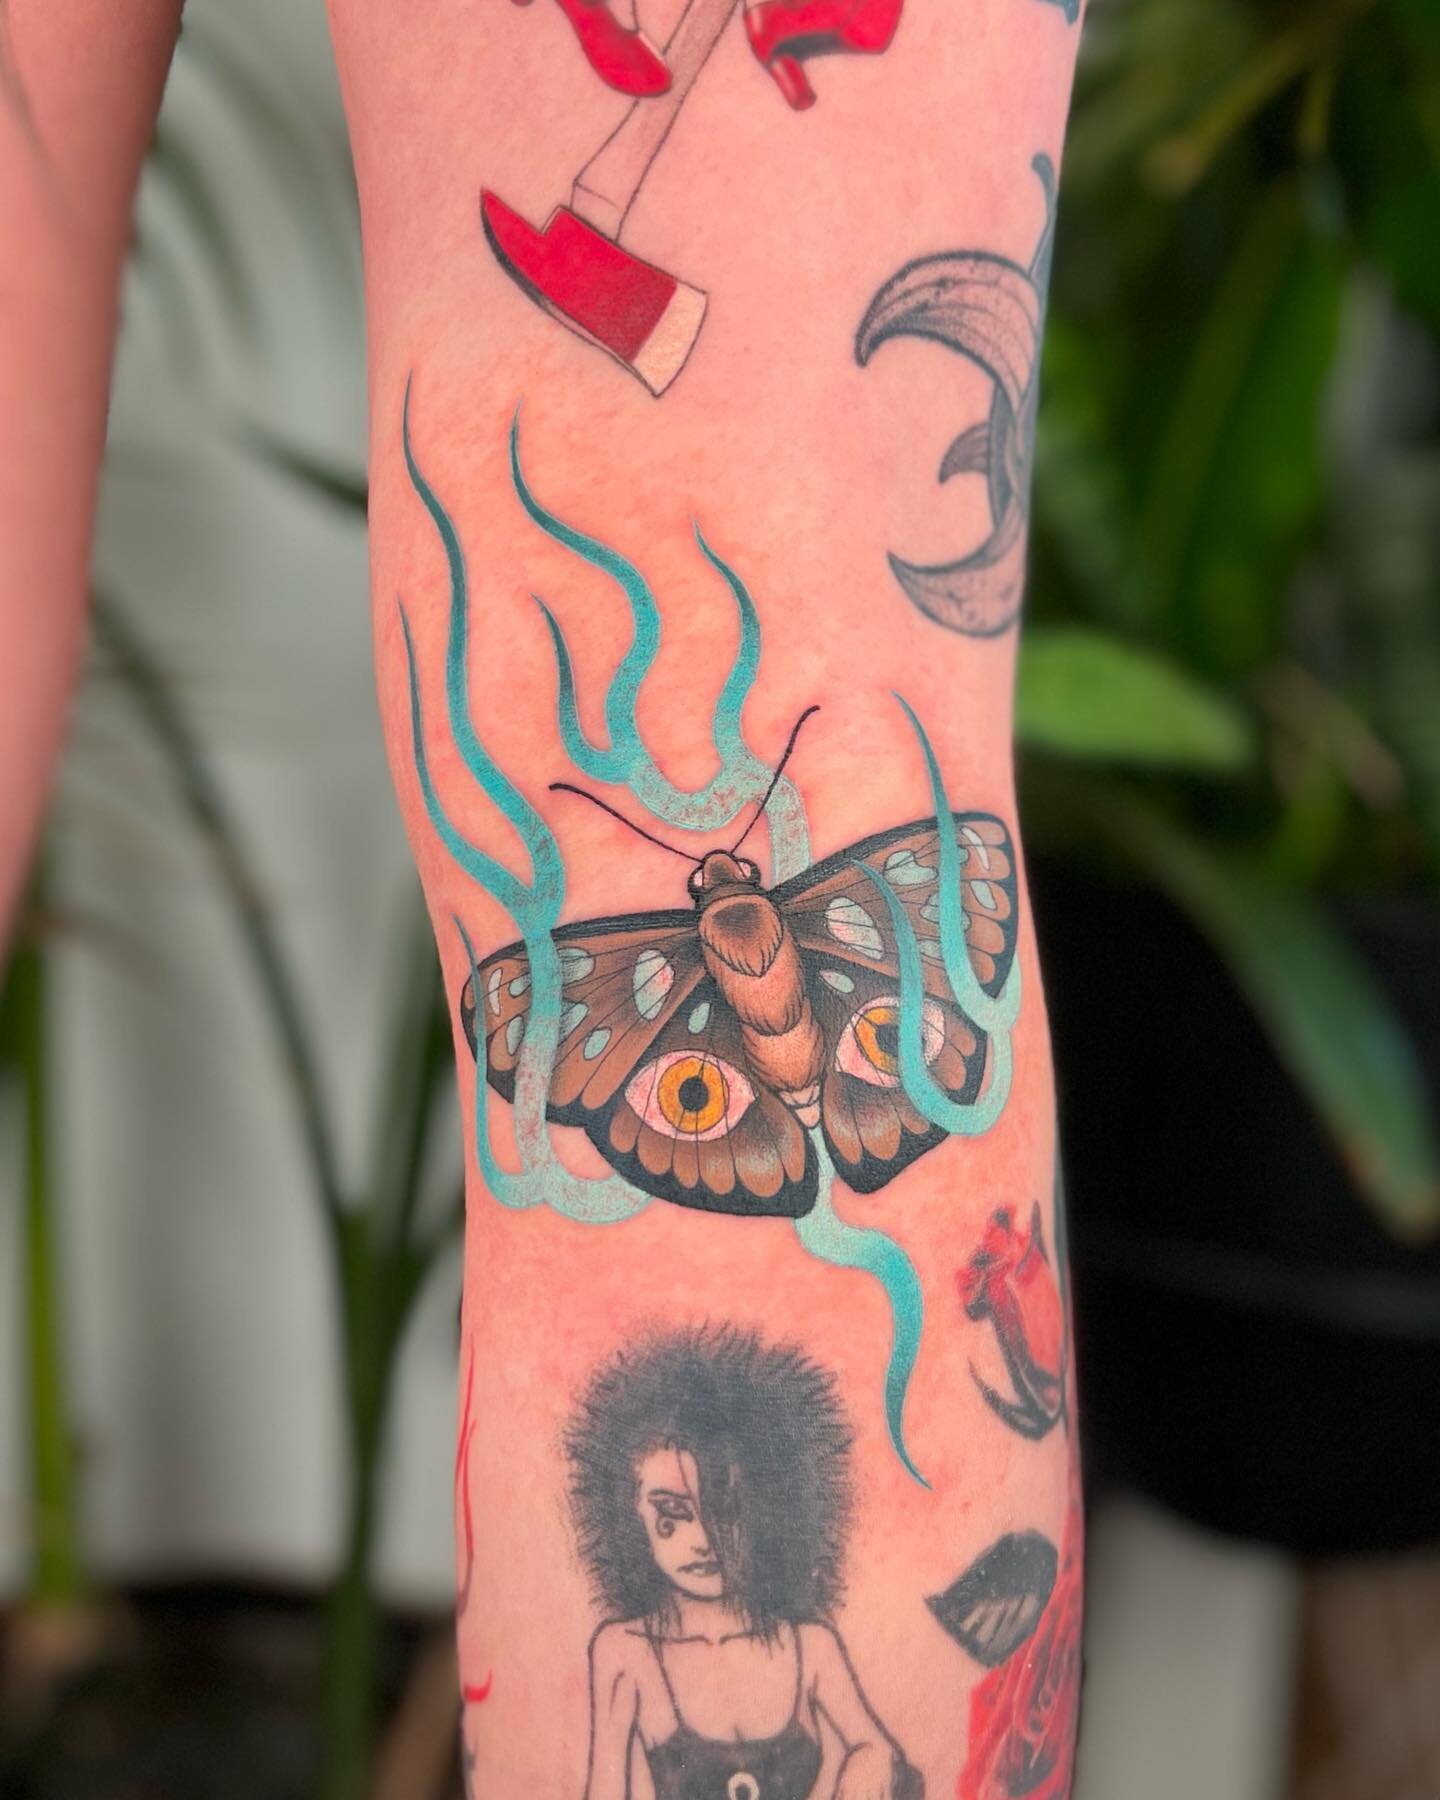 flaming moth
had the honor of tattooing @jandruff &lsquo;s spicy lil knee ditch and she sat like a g 
&bull;
#RayCorsonTattoo 
#DallasTattooArtist 
#TexasTattoos
#FemaleTattooer